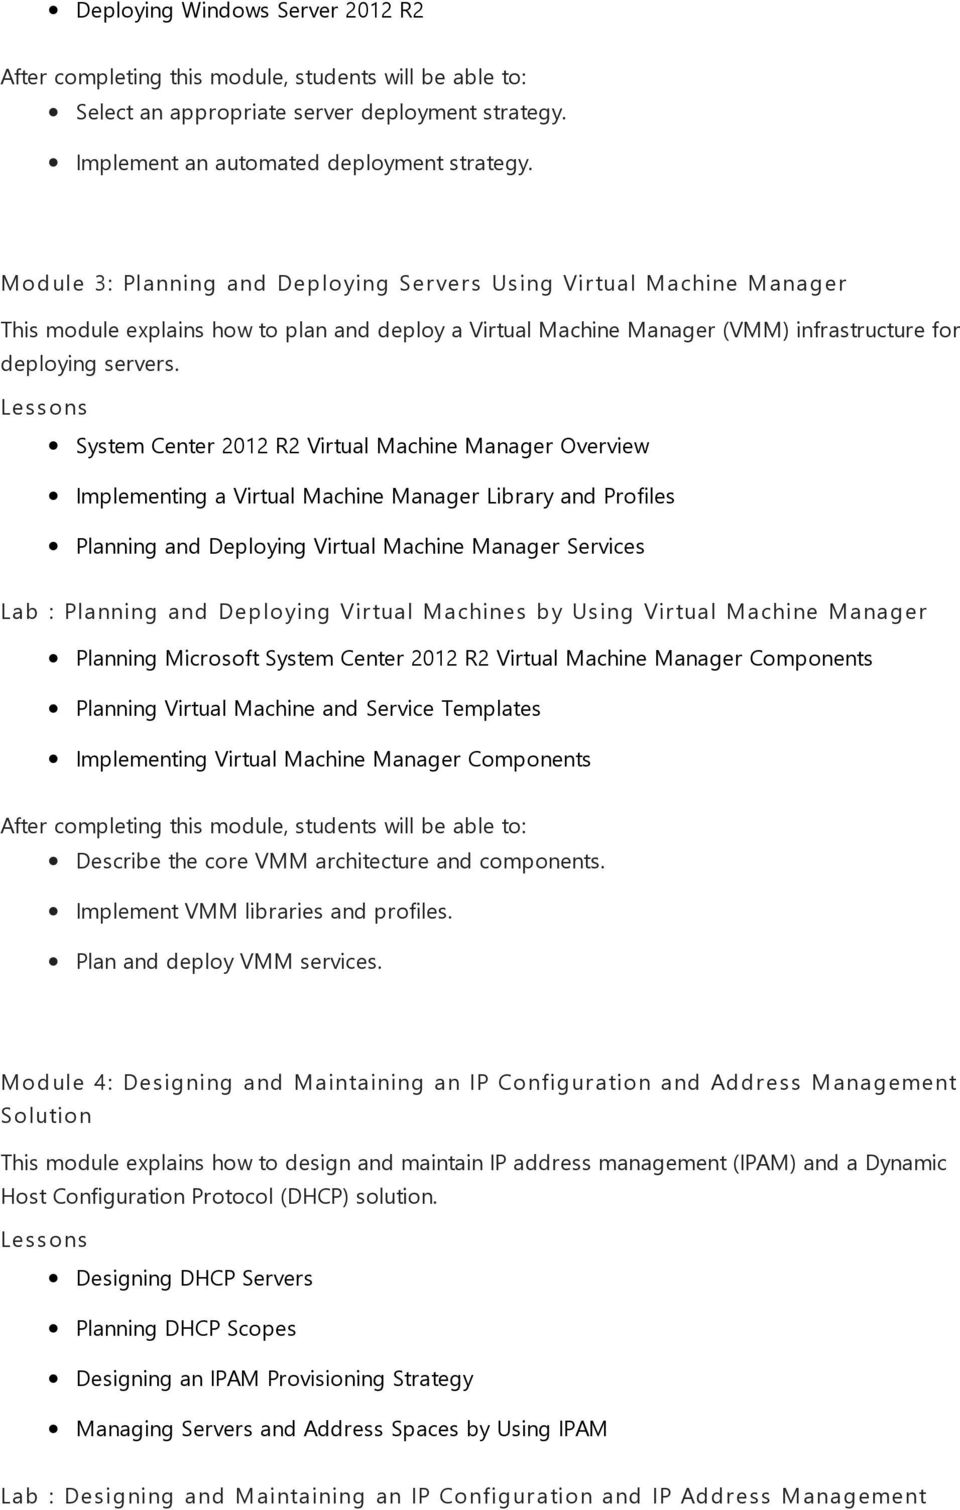 System Center 2012 R2 Virtual Machine Manager Overview Implementing a Virtual Machine Manager Library and Profiles Planning and Deploying Virtual Machine Manager Services Lab : Planning and Deploying